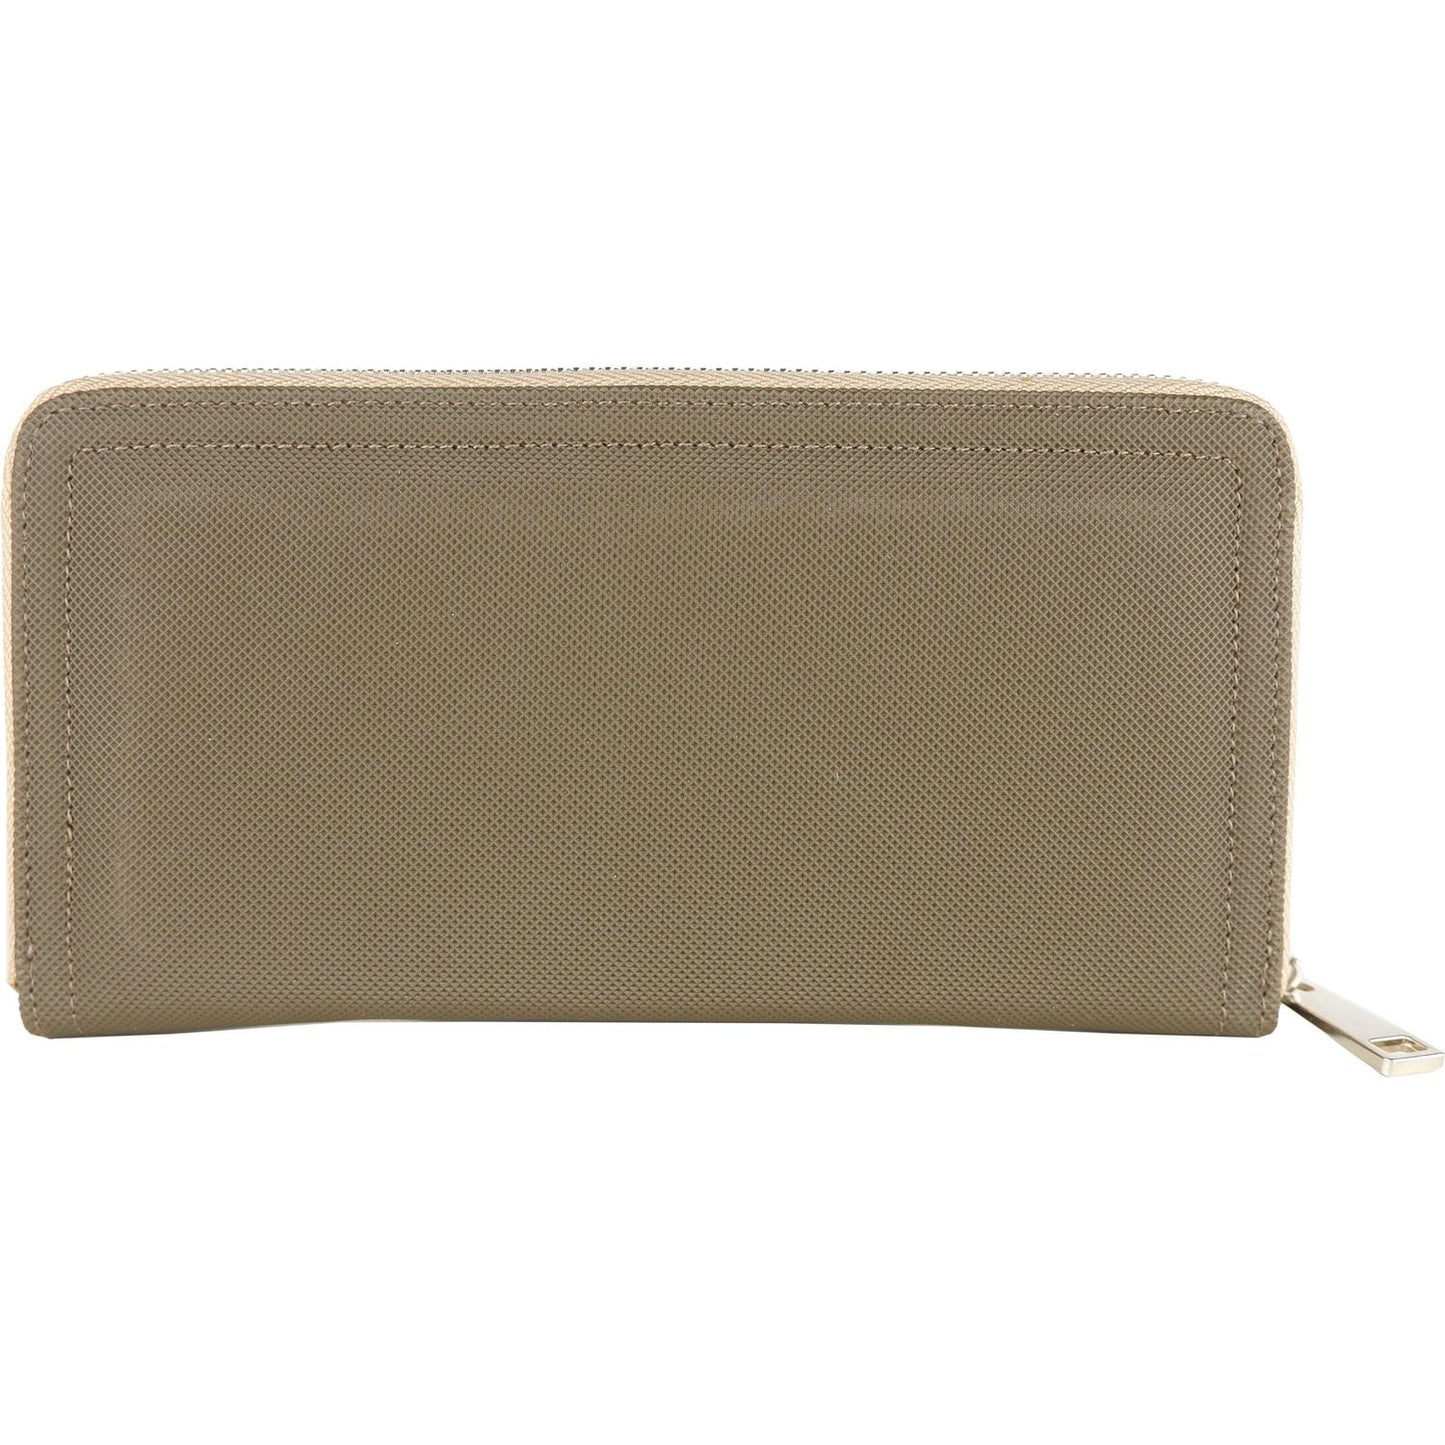 La Martina Chic Kaky Green Wallet with Leather Accents chic-kaky-green-wallet-with-leather-accents